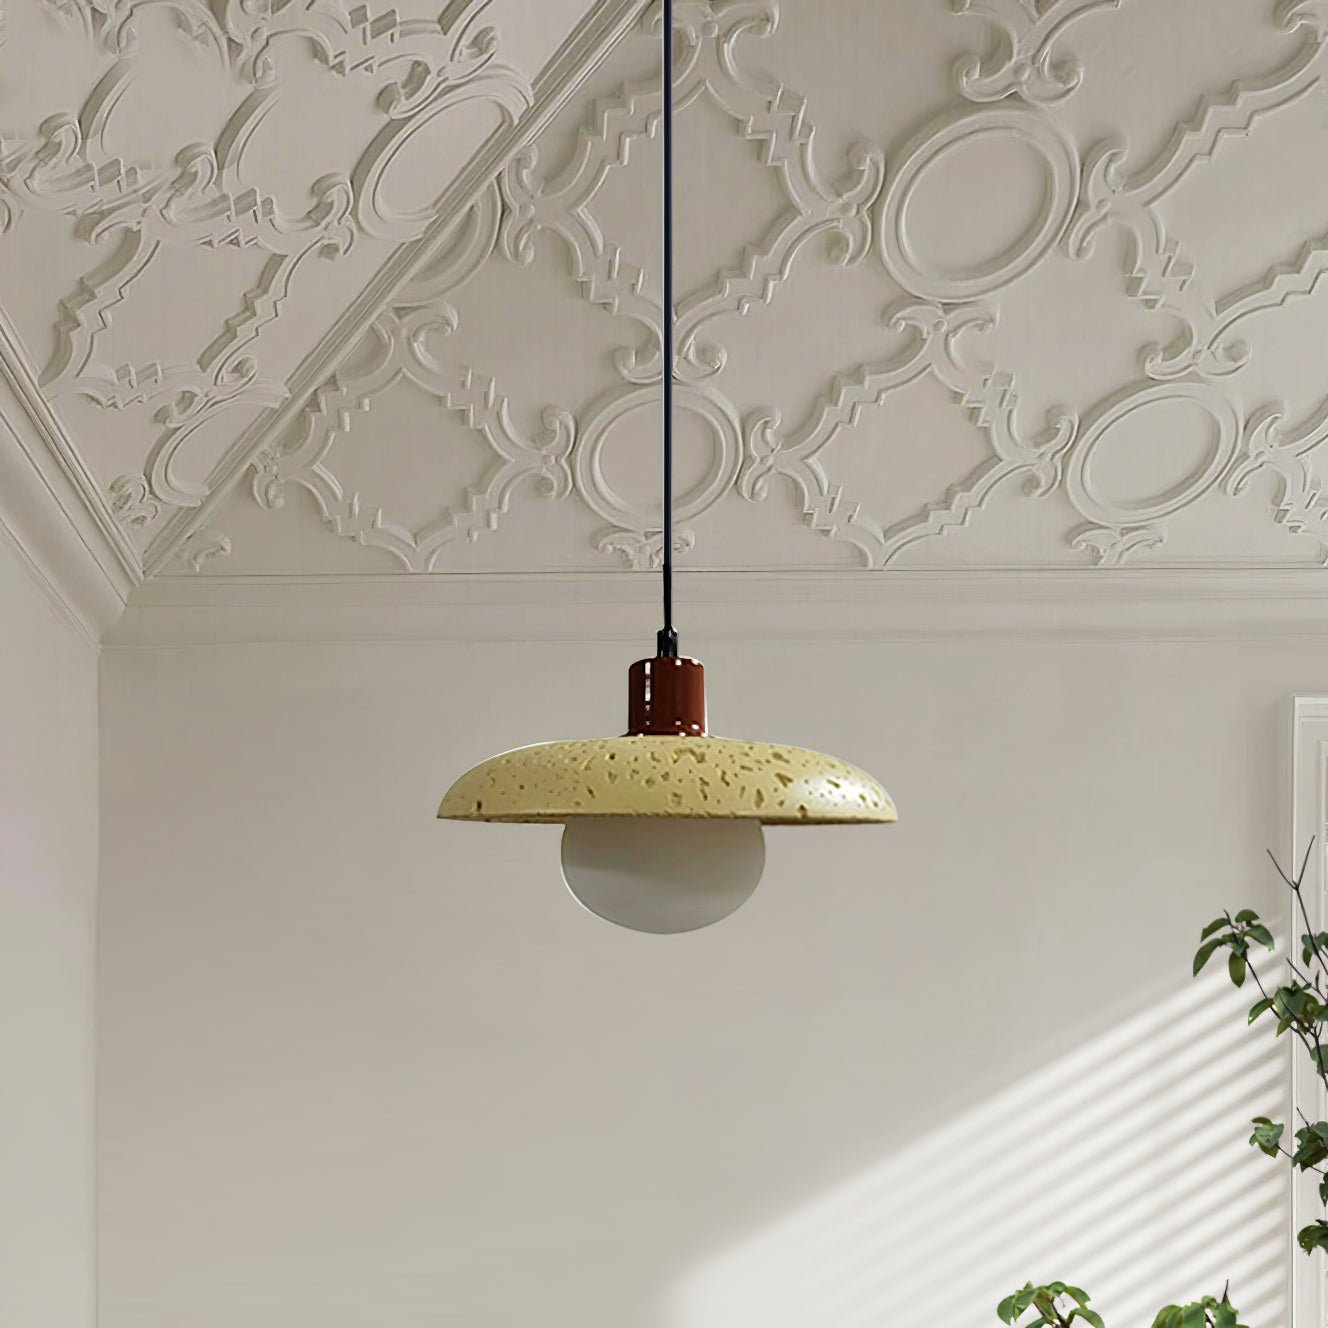 Cement Pendant Light" with dimensions of "Diameter 9.8 inches x Height 4.9 inches" or "Diameter 25cm x Height 12.5cm